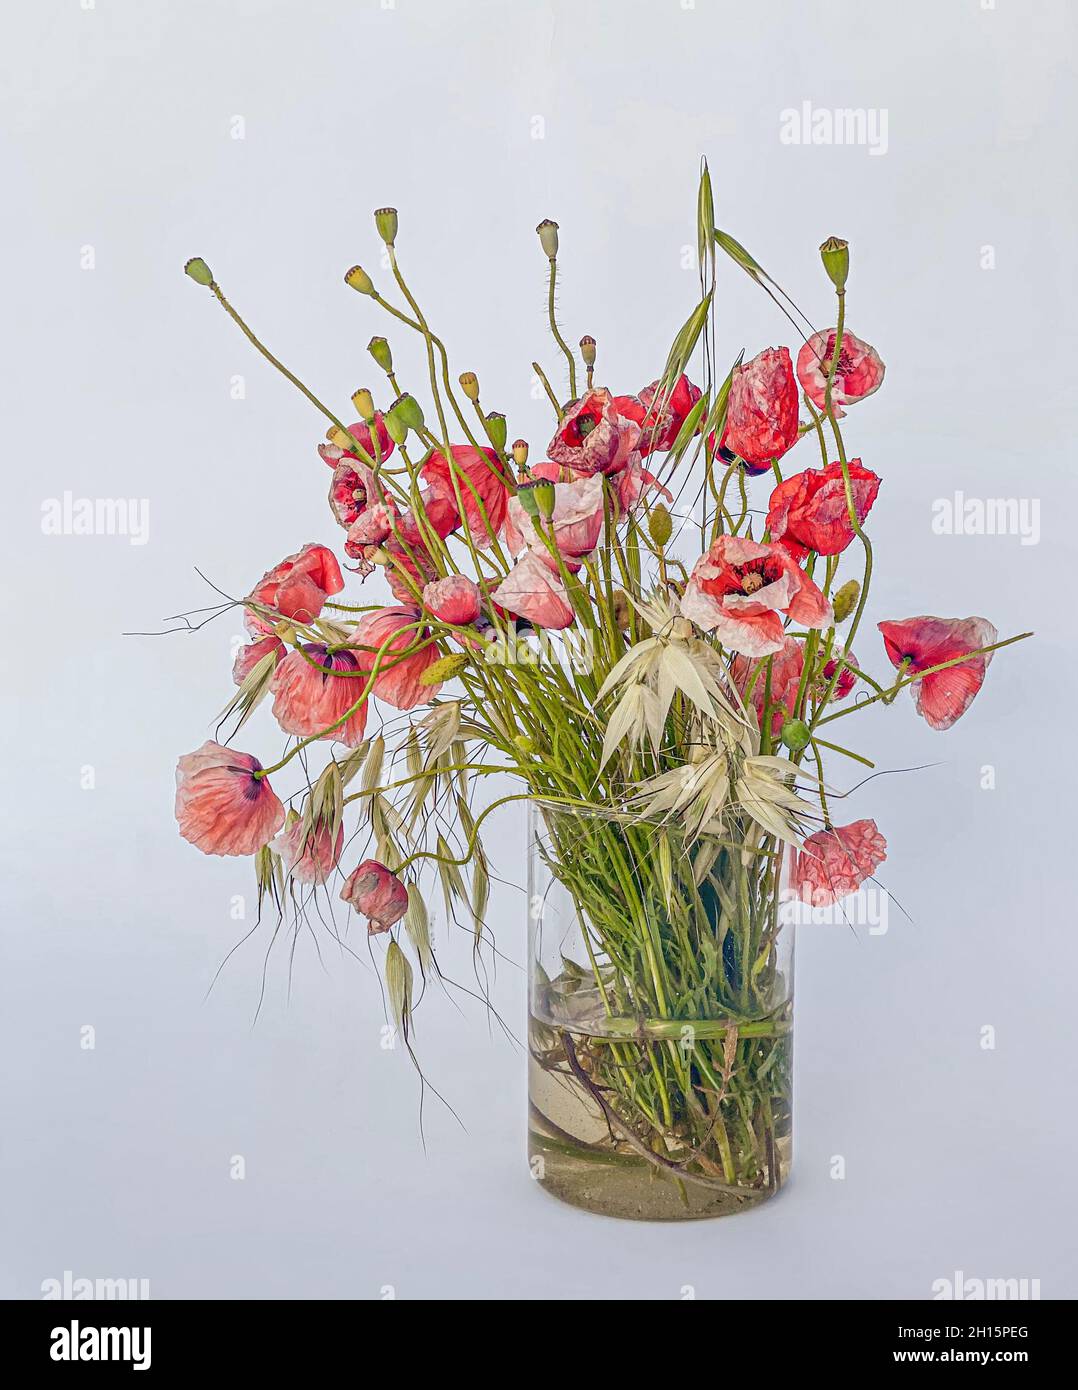 GLASS FLOWERS GIFT IN A VASE OF GORGEOUS POPPIES AND GRASS REMEMBERANCE SYMBOL 